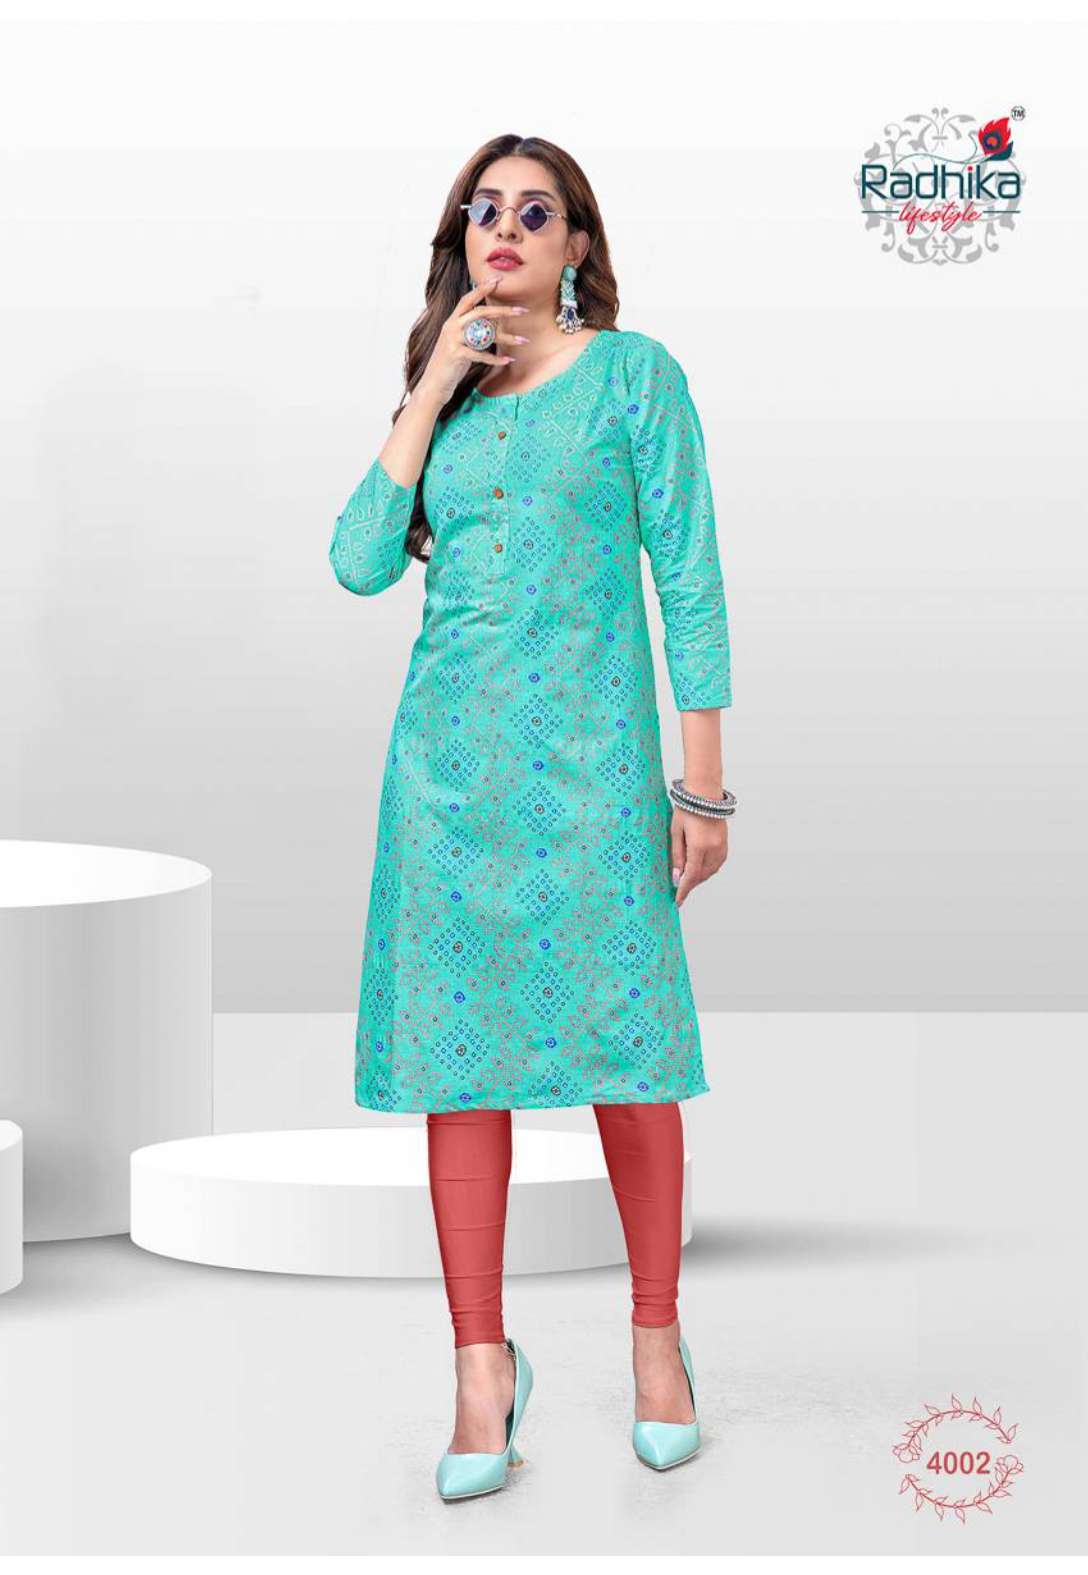 Brand Factory - Catalog Name: *Gangotri Unique Women Kurtis Vol 8* Fabric:  Kurti - Cotton, Palazzo - Cotton Sleeves: 3/4 Sleeves Are Included Size:  Kurti : M - 38 in, L -